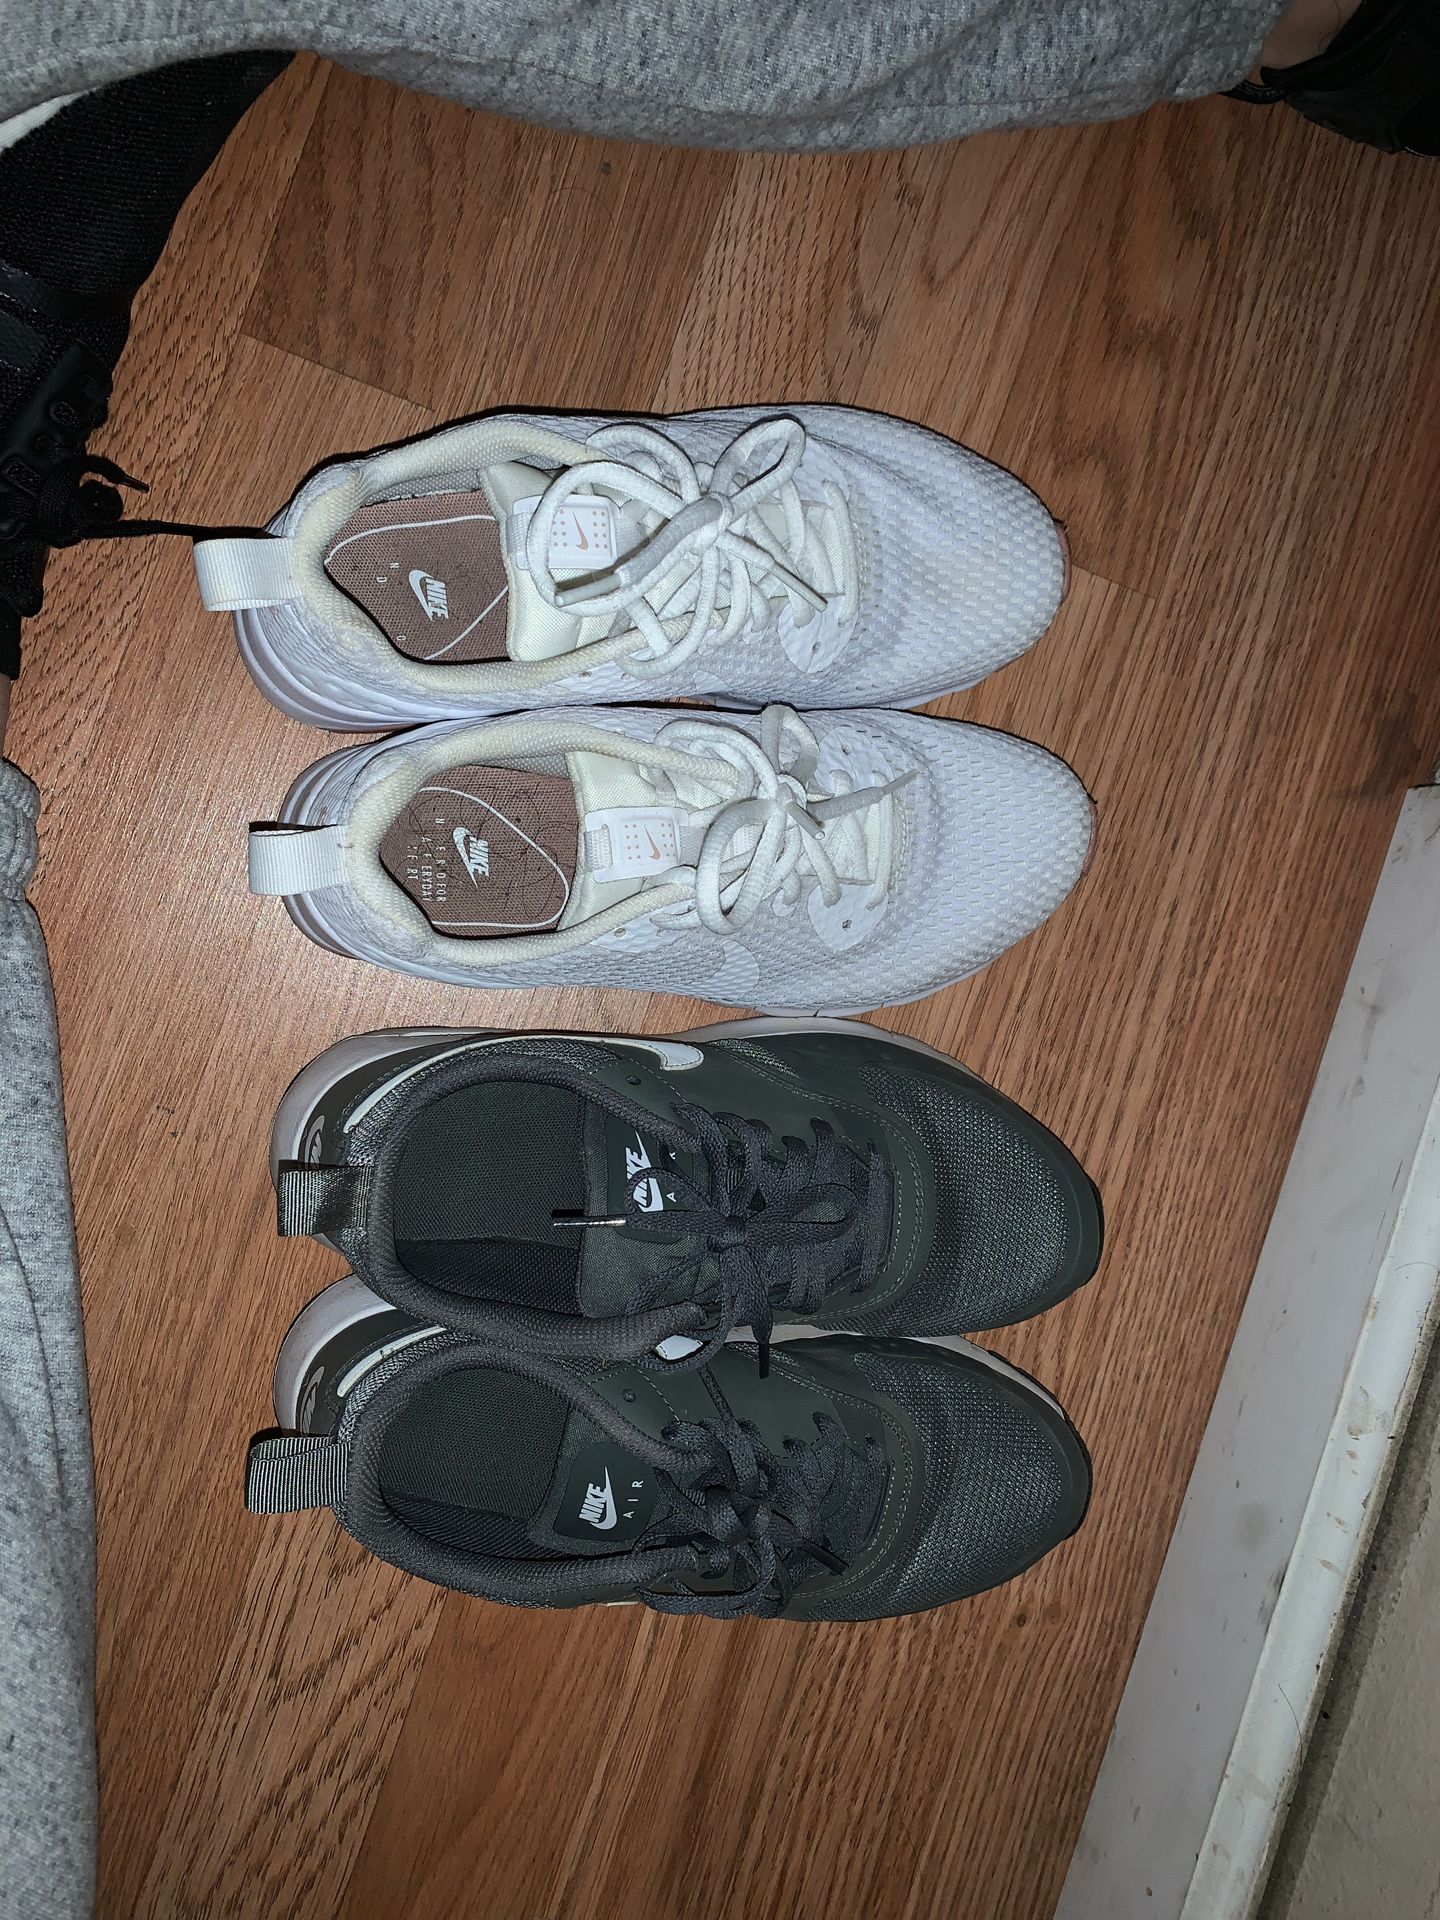 Nike shoes good condition white one are size 71/2 green are size 61/2 $40 each